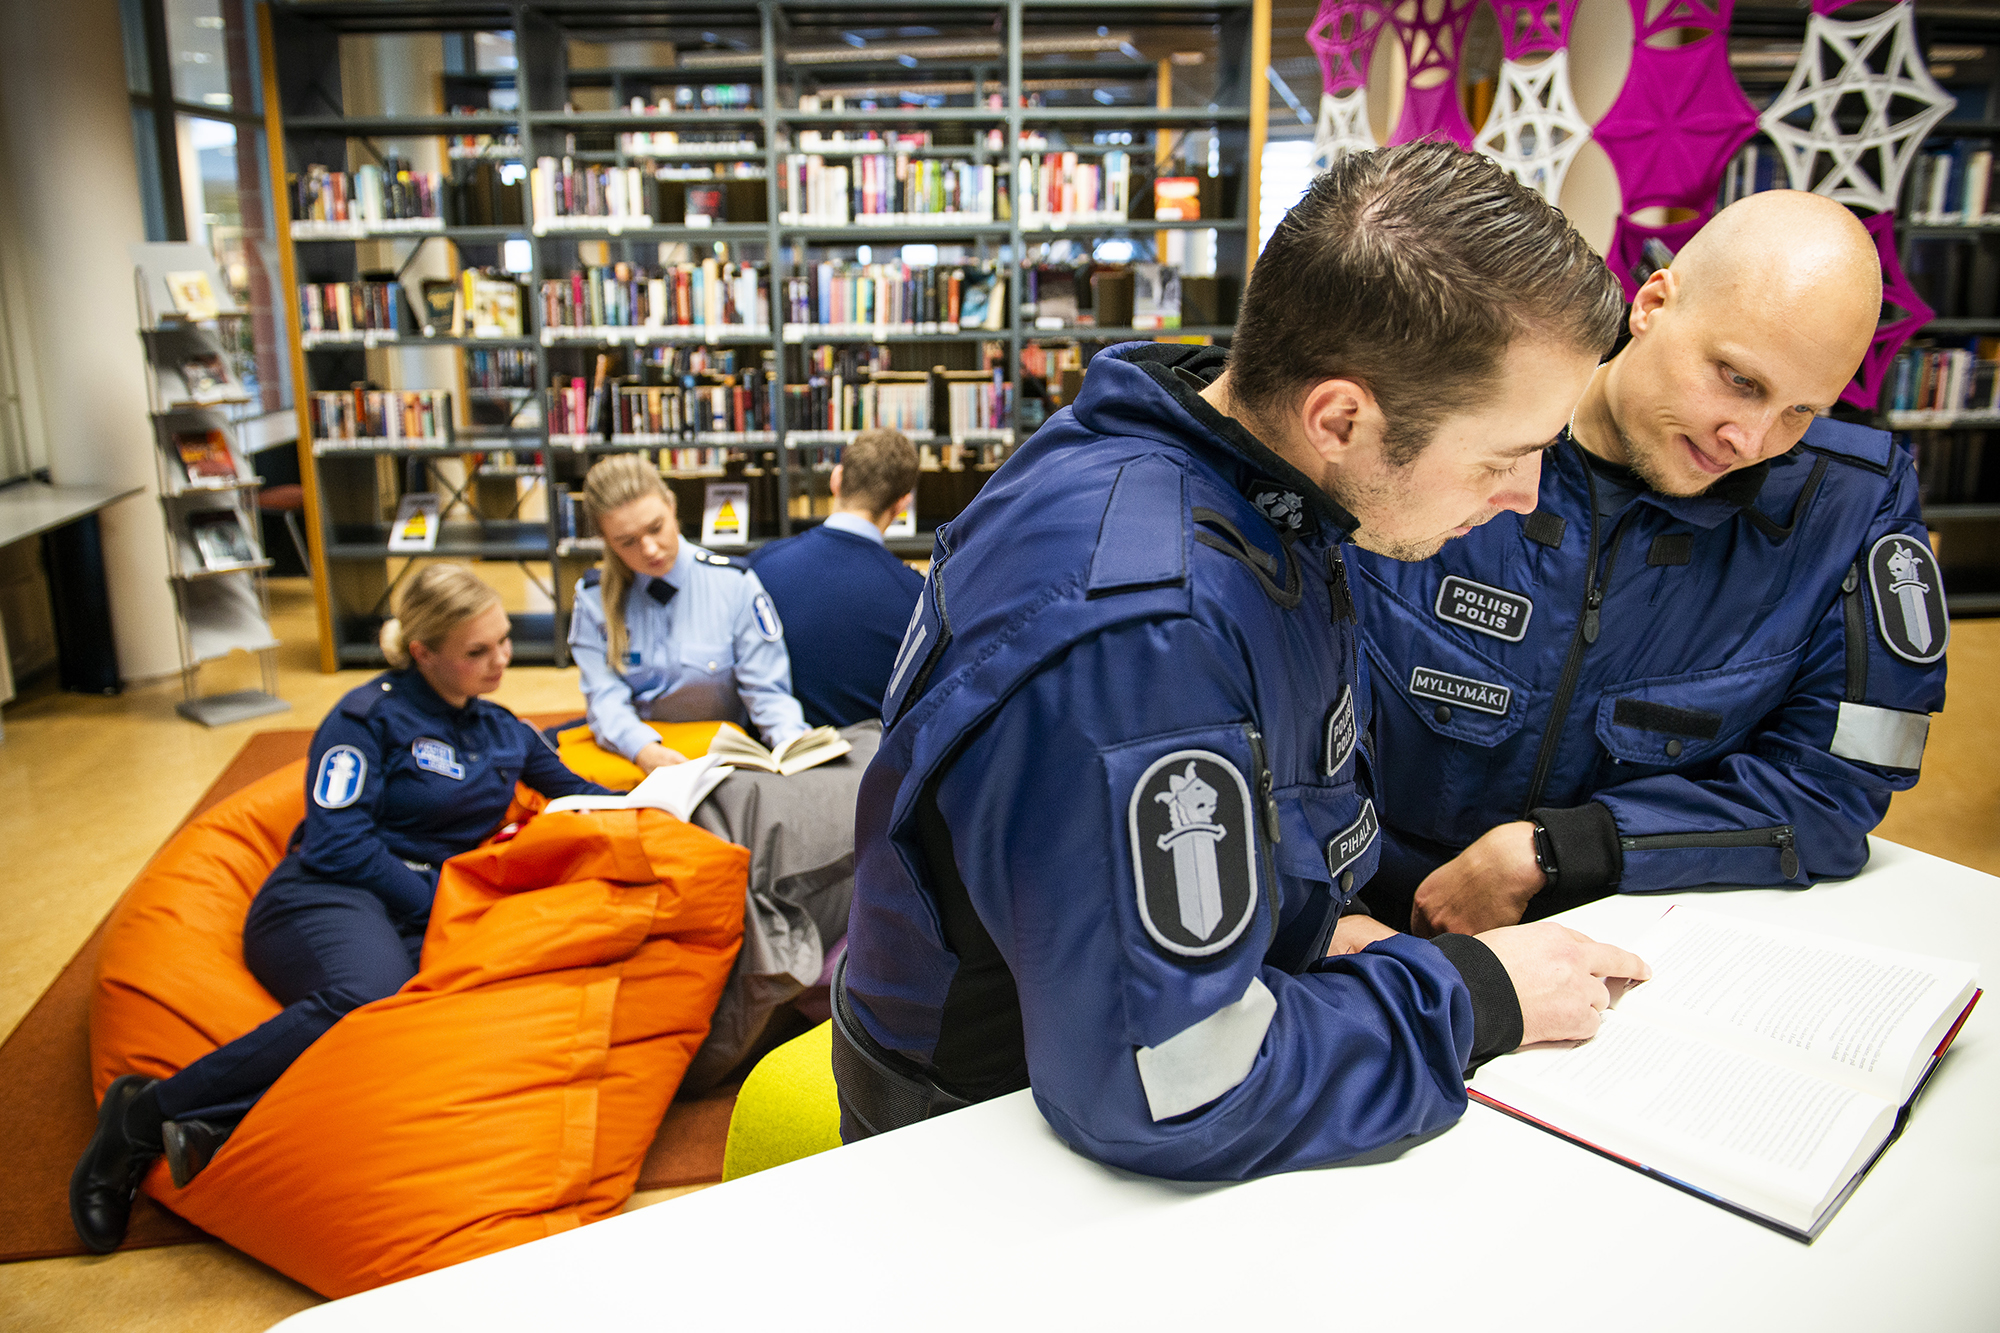 Five uniformed police students reading in the library of Polamk.